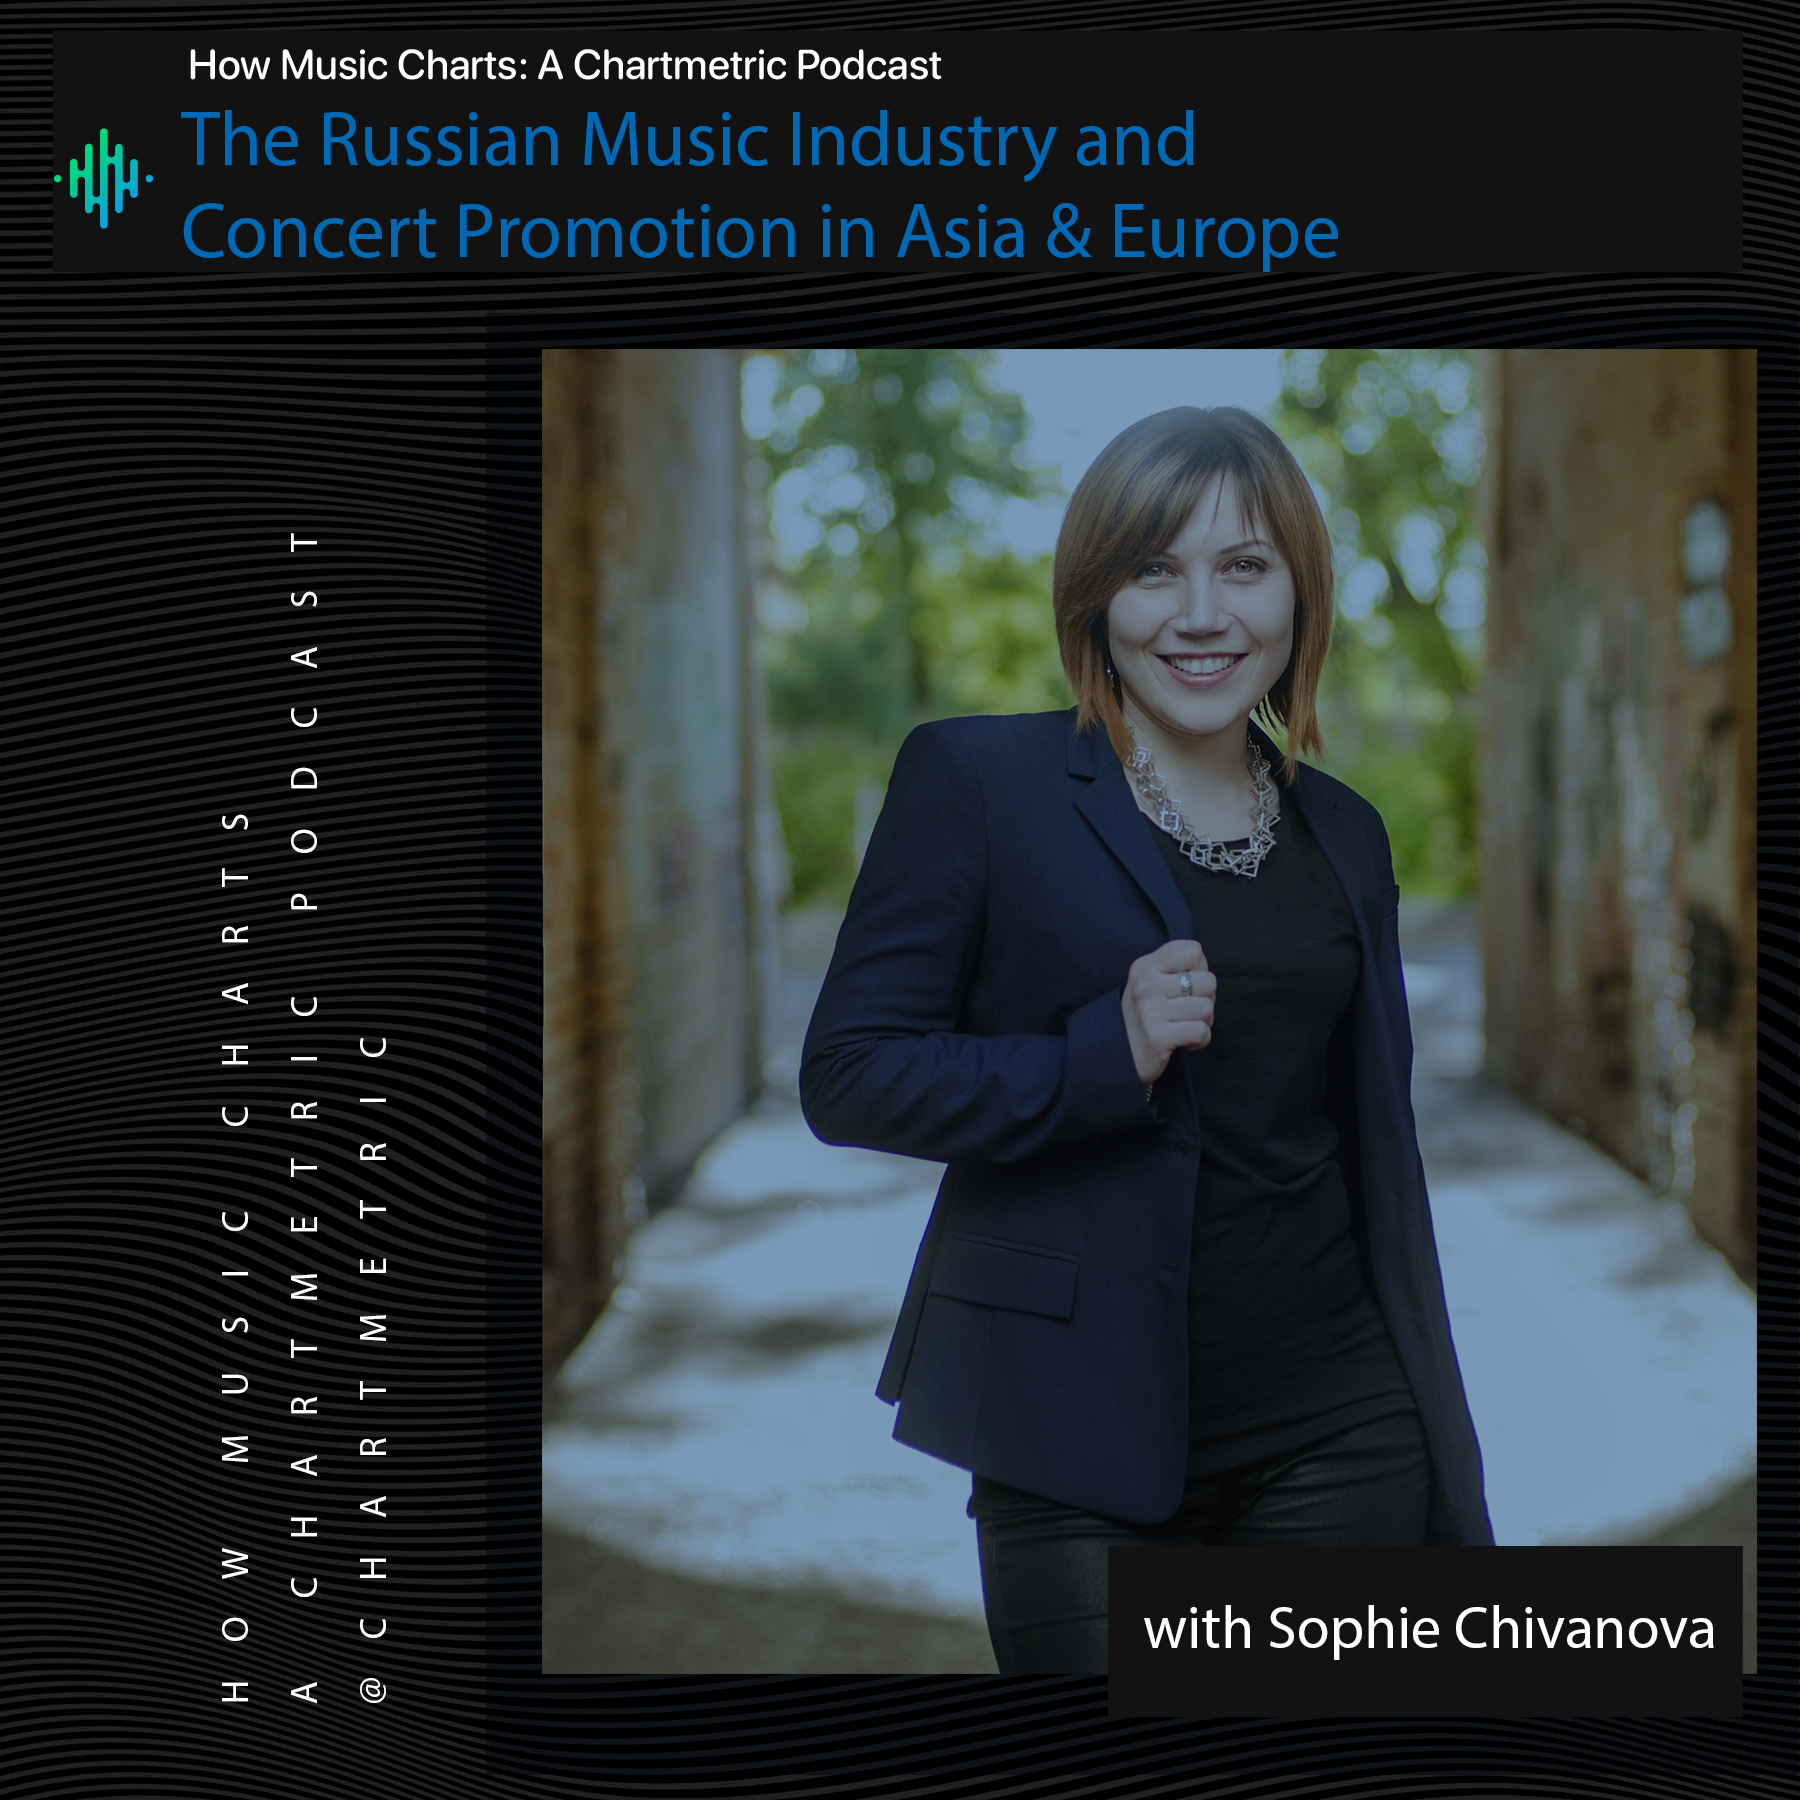 The Russian Music Industry and Concert Promotion in Asia & Europe With Sophie Chivanova